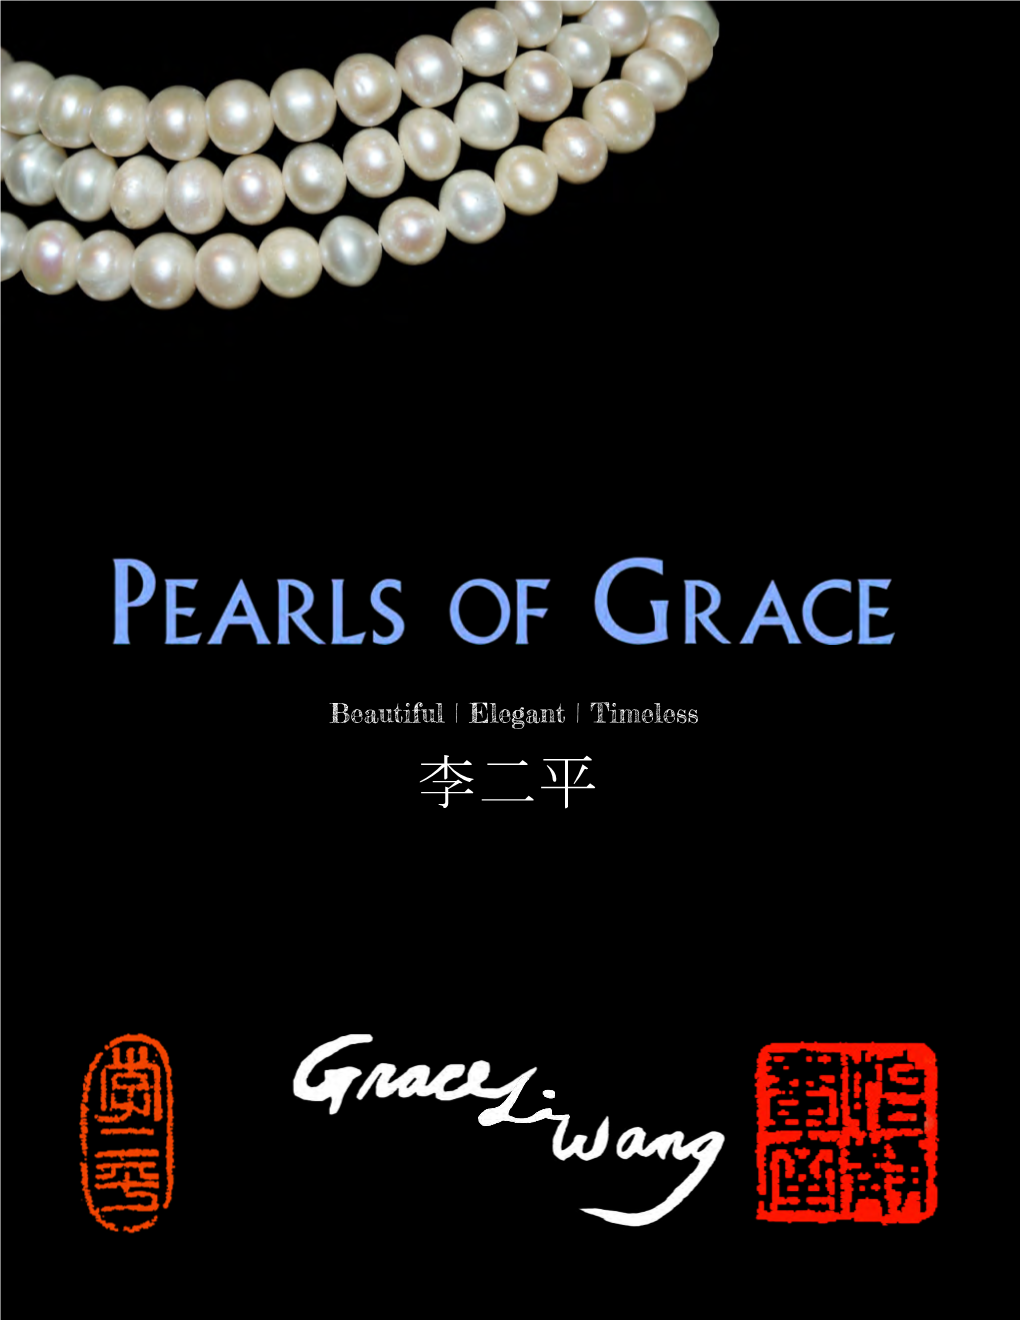 The Pearls Catalog